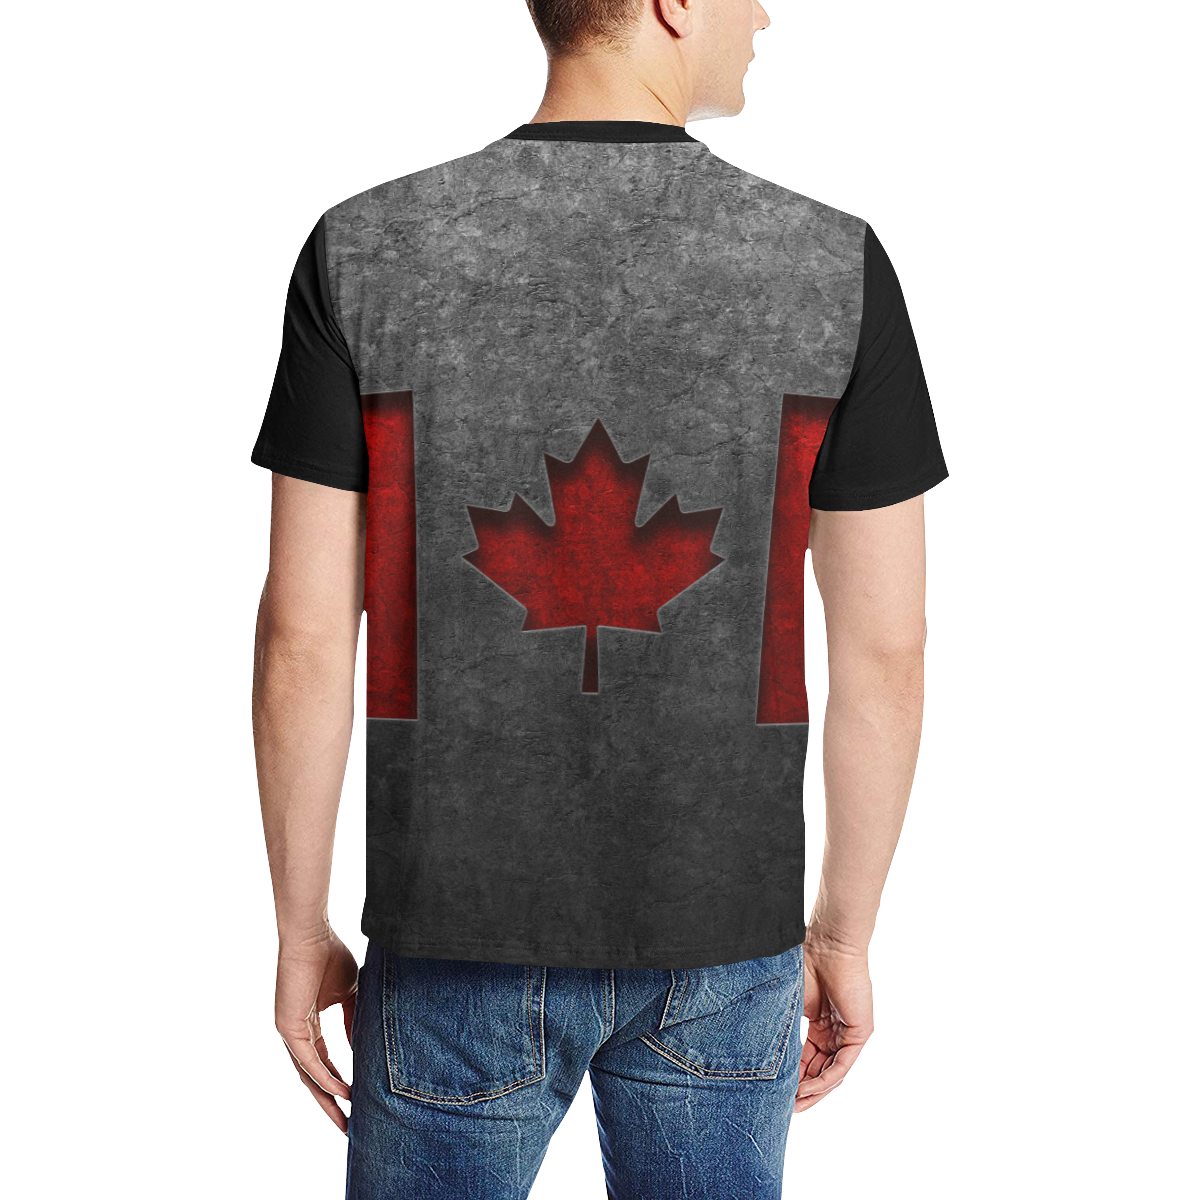 Canadian Flag Stone Texture Men's All Over Print T-Shirt (Solid Color Neck) (Model T63)